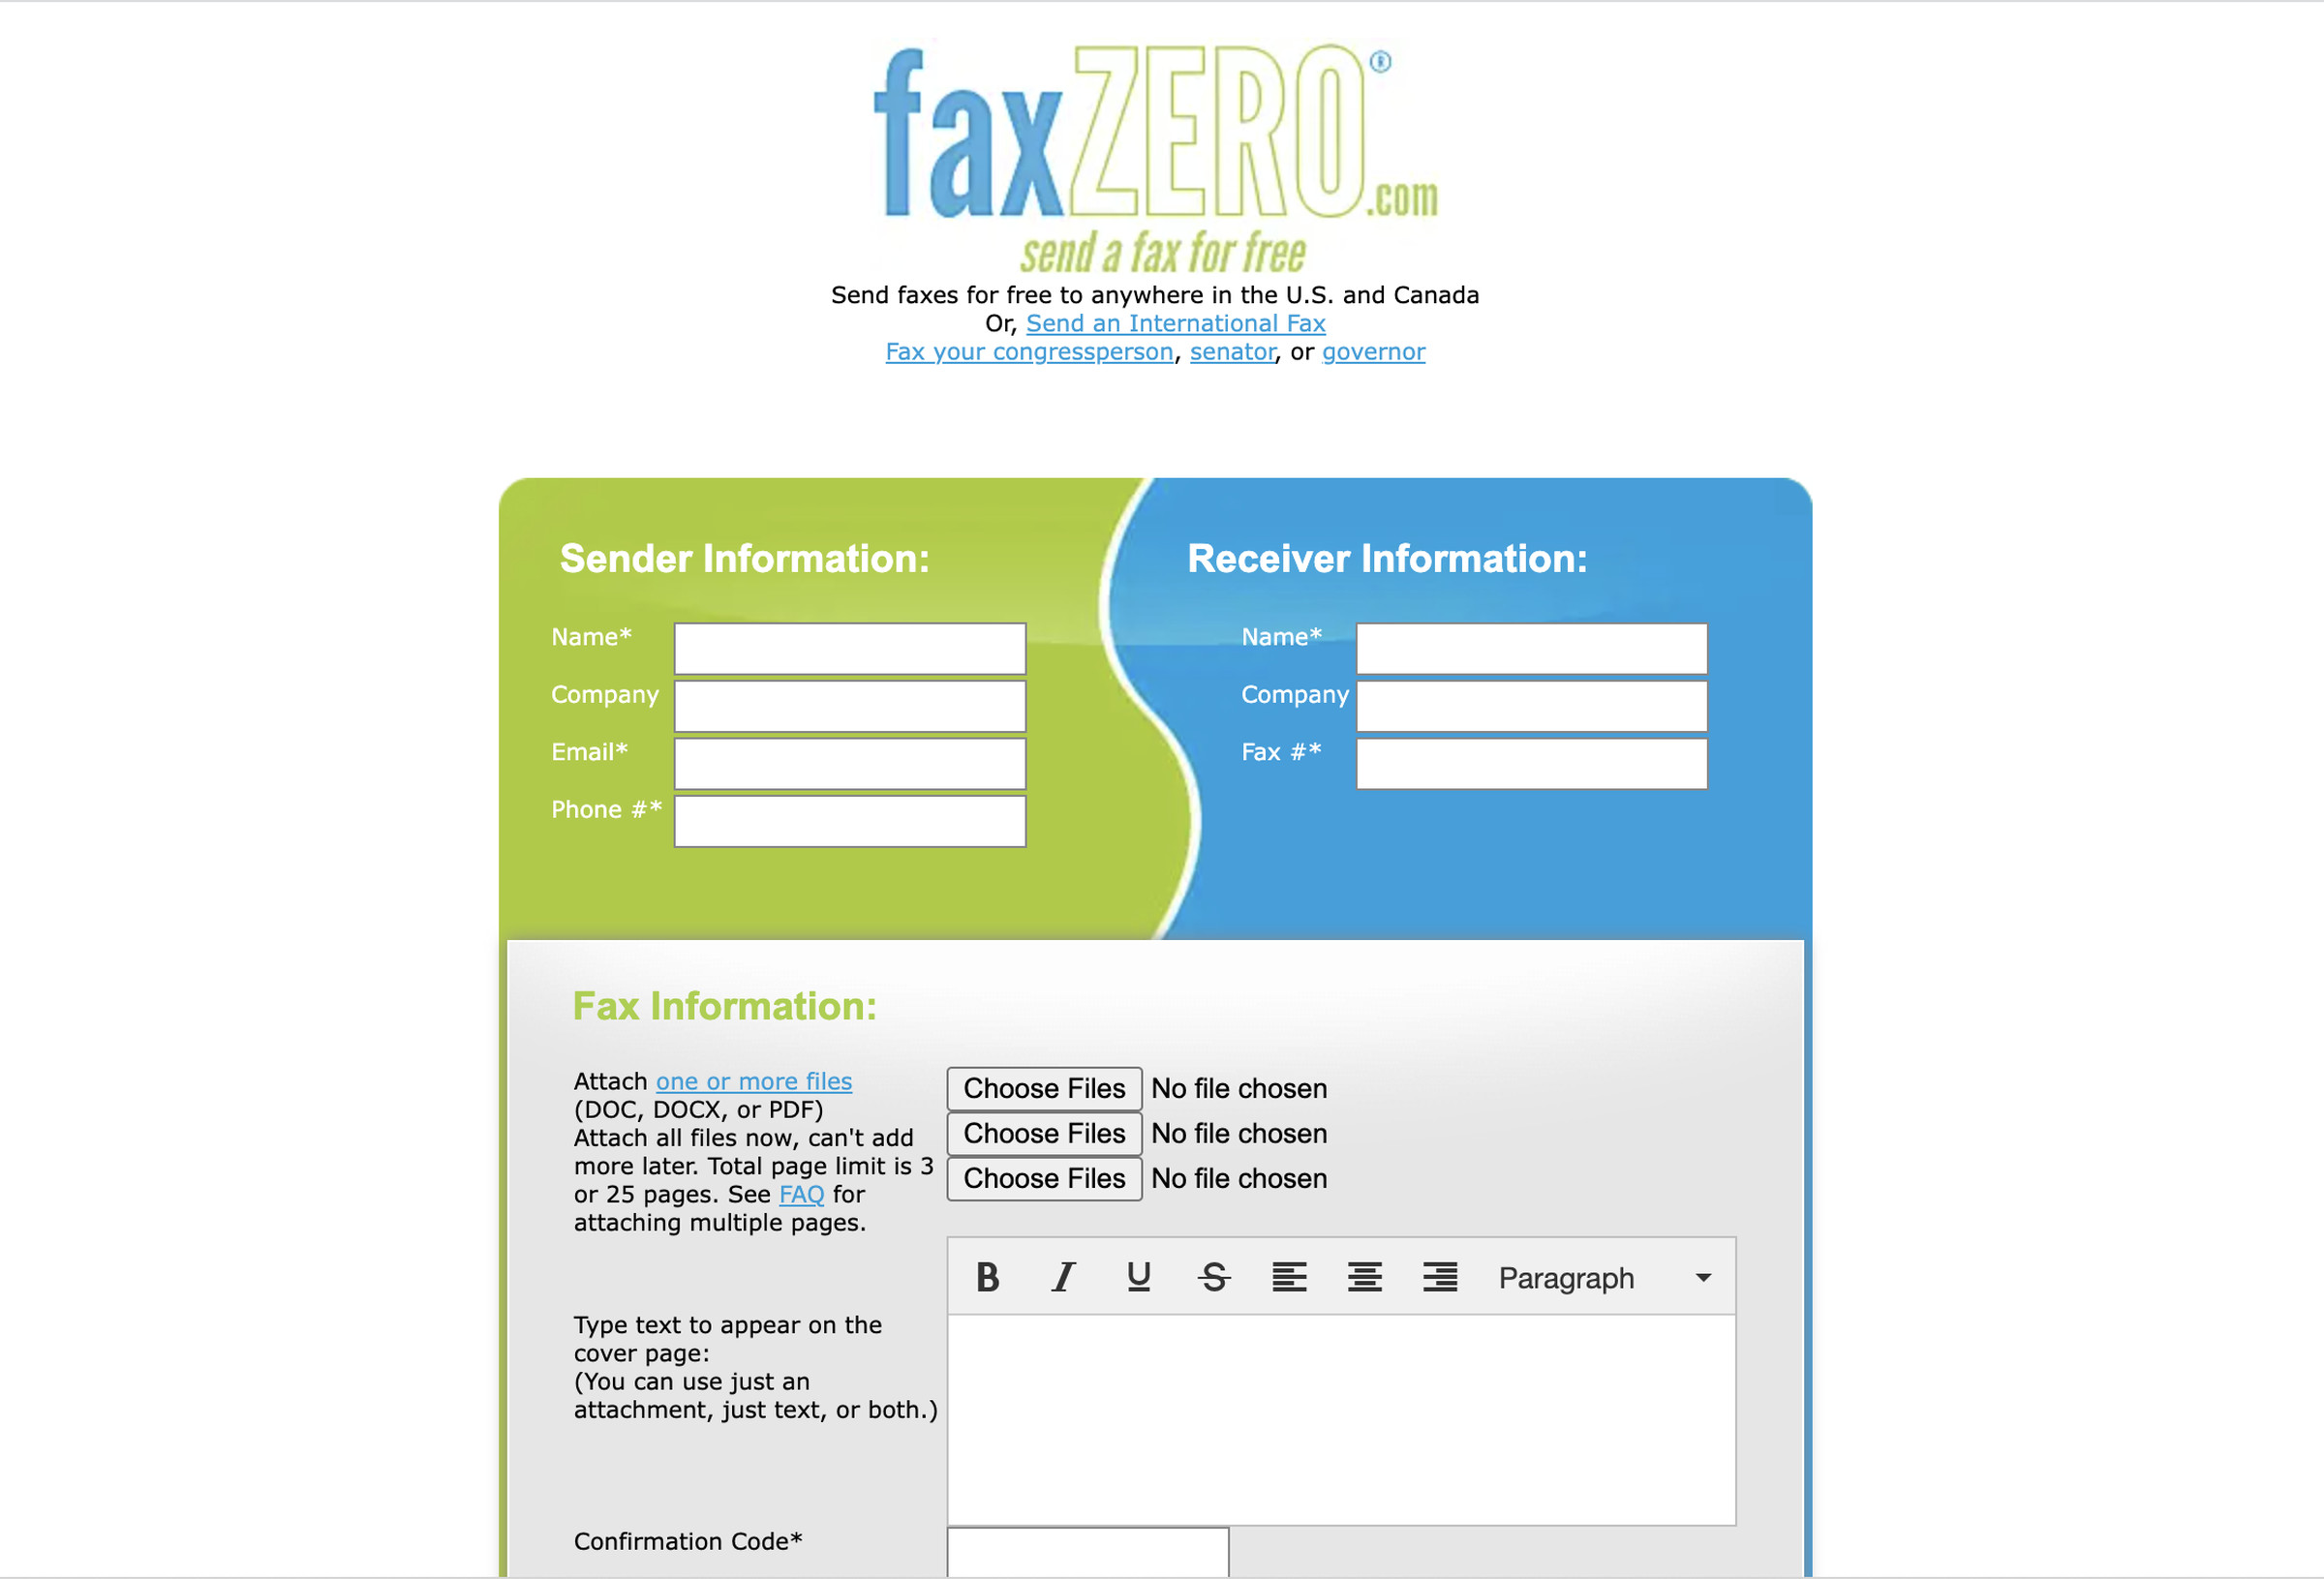 FaxZero page with a box that asked for Send information on the top left, Receiver information on the top right, and Fax information below, with buttons to add files and a box in which to write text for a cover page.